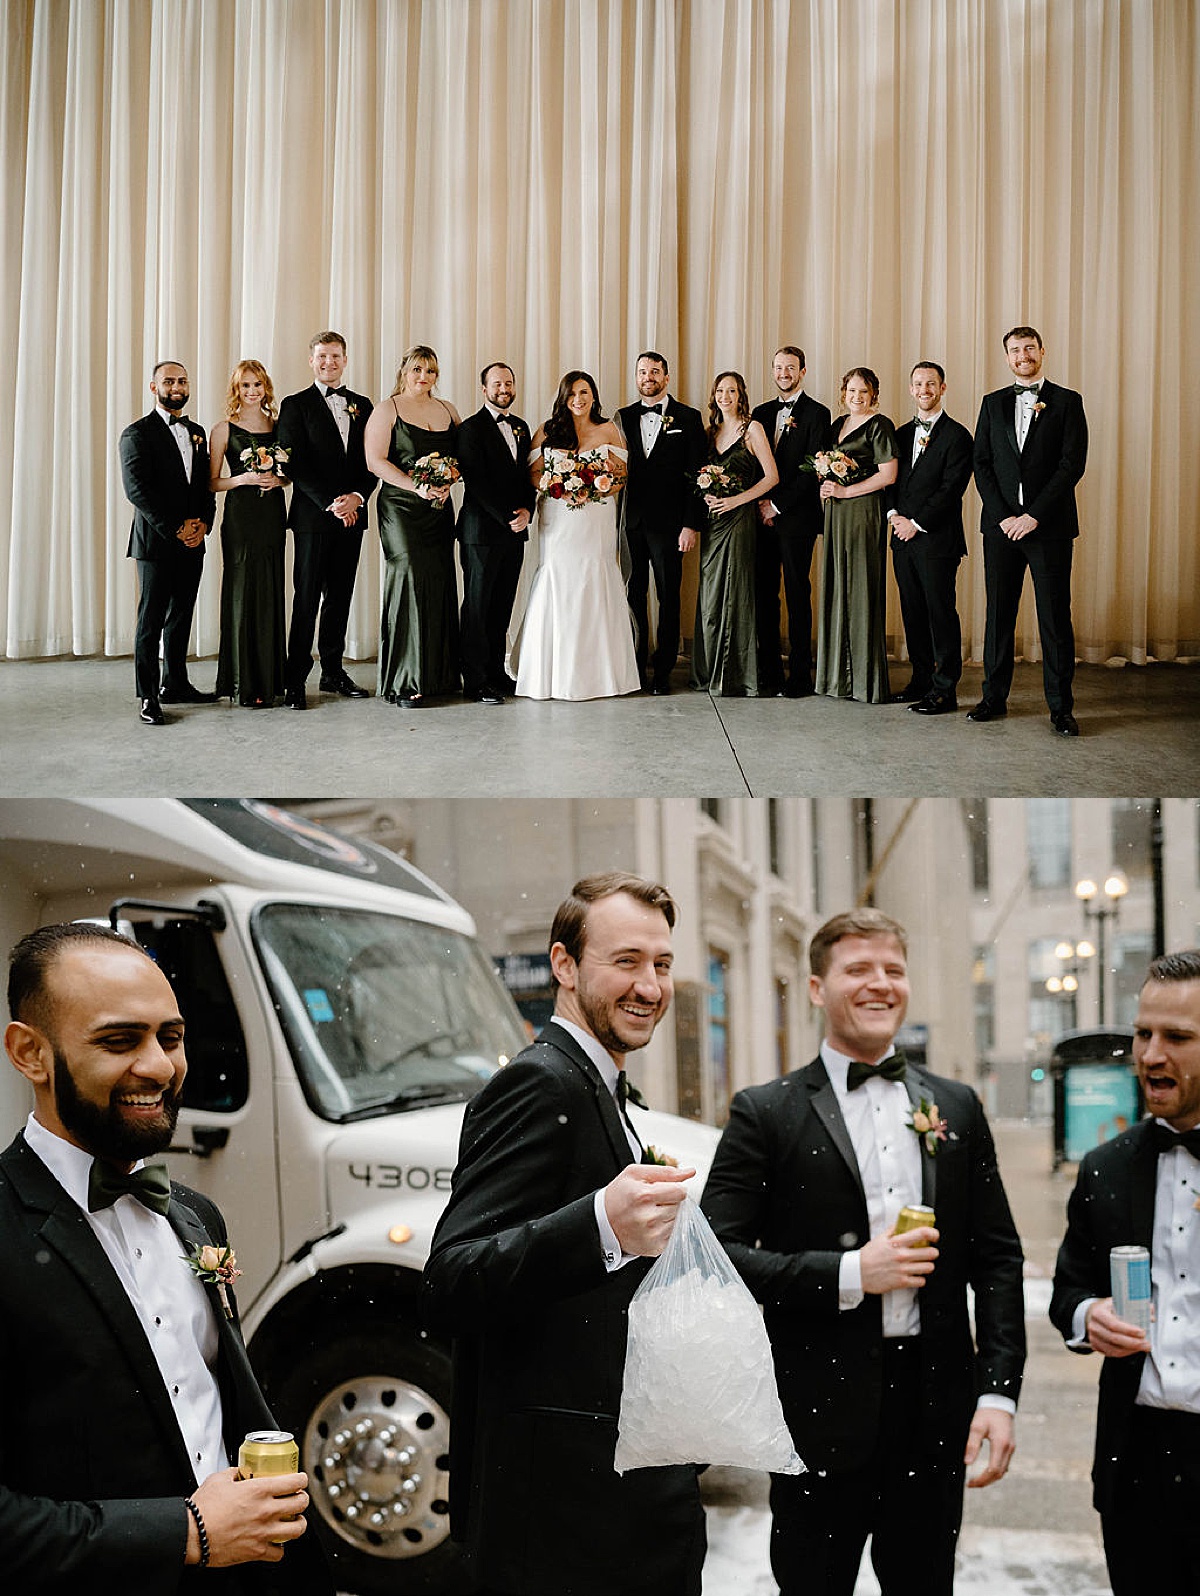 wedding party poses with bride and groom while sharing drinks together before ceremony shot by Chicago wedding photographer